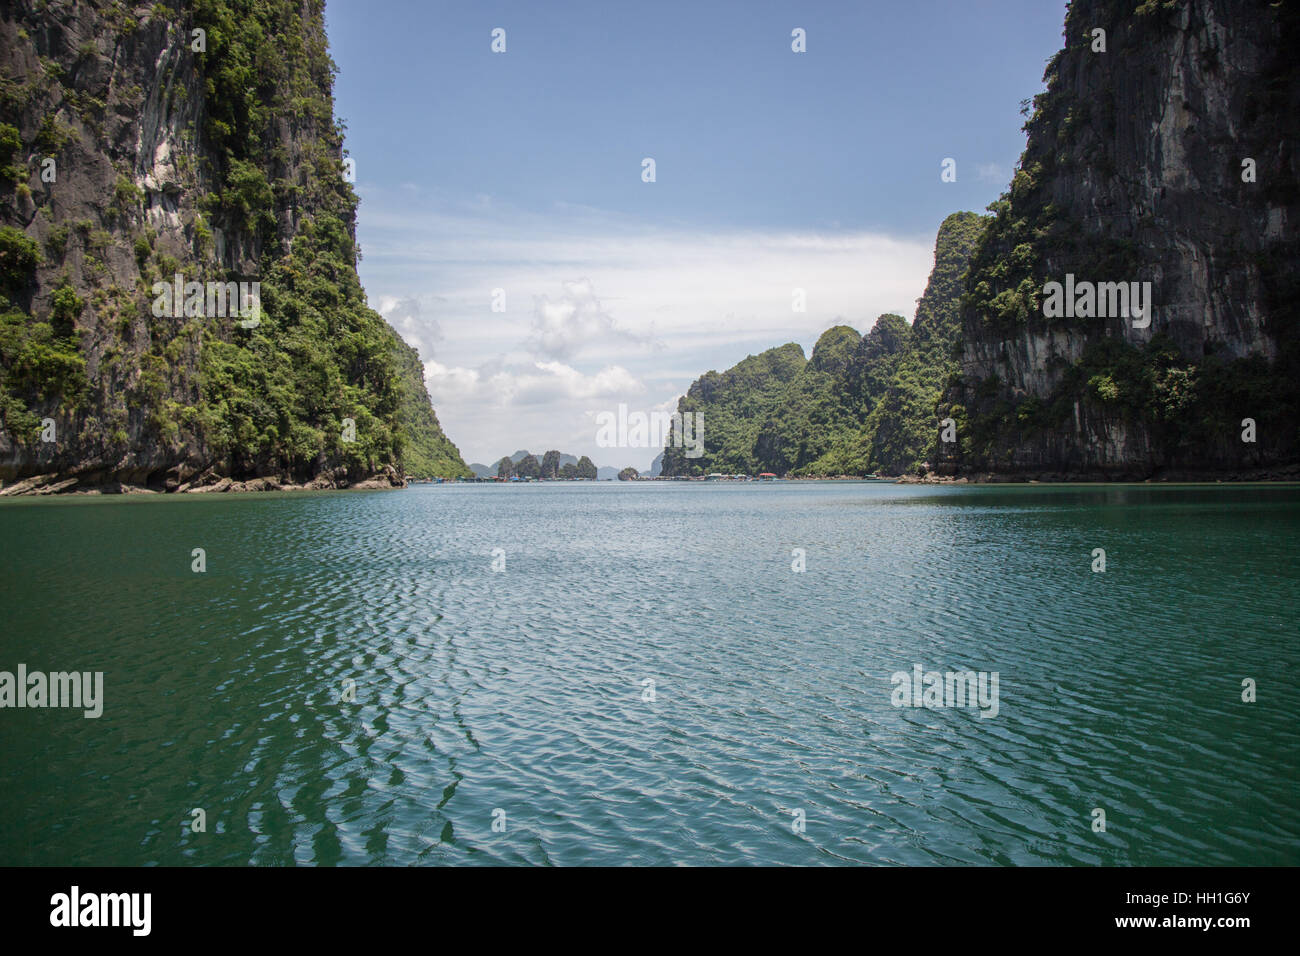 A view from the boat approaching Halong Bay Fishing Village in Vietnam. Stock Photo